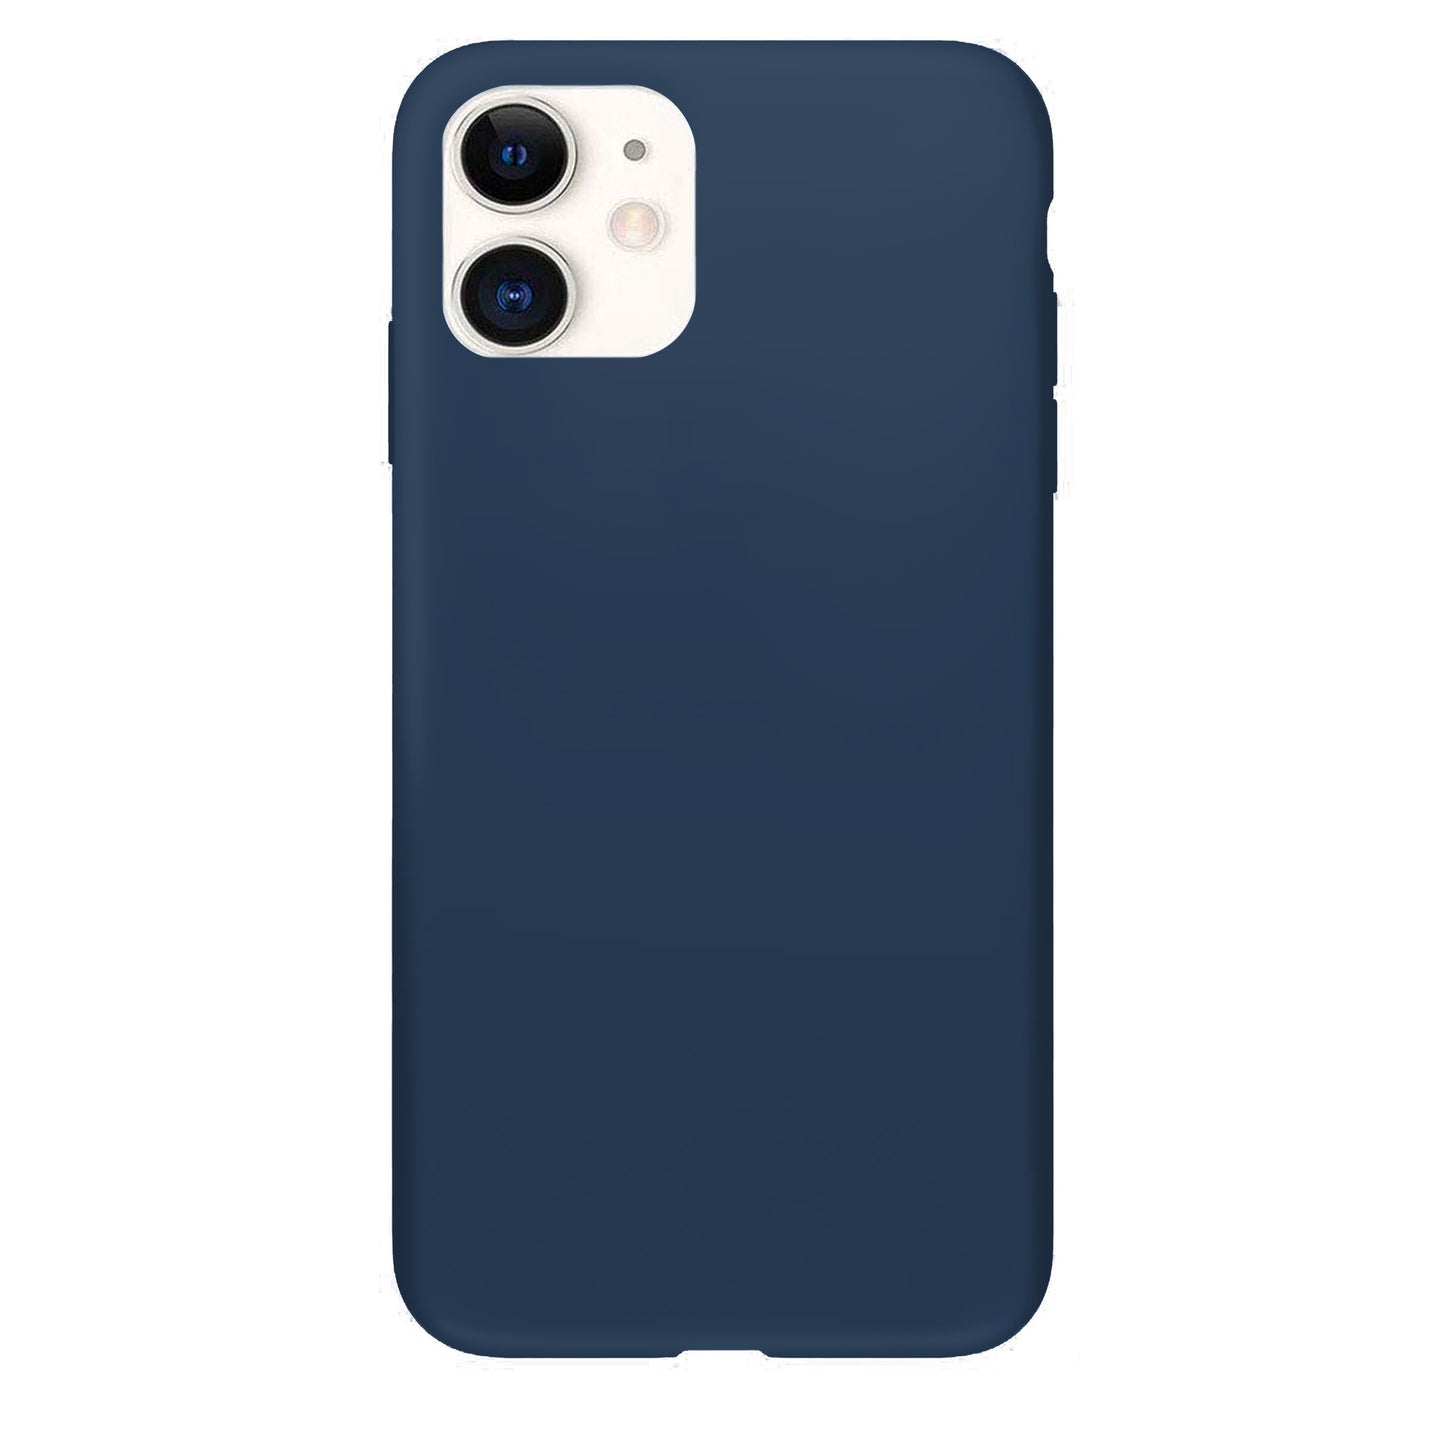 Cobalt Blue Silicone Case for iPhone and Samsung